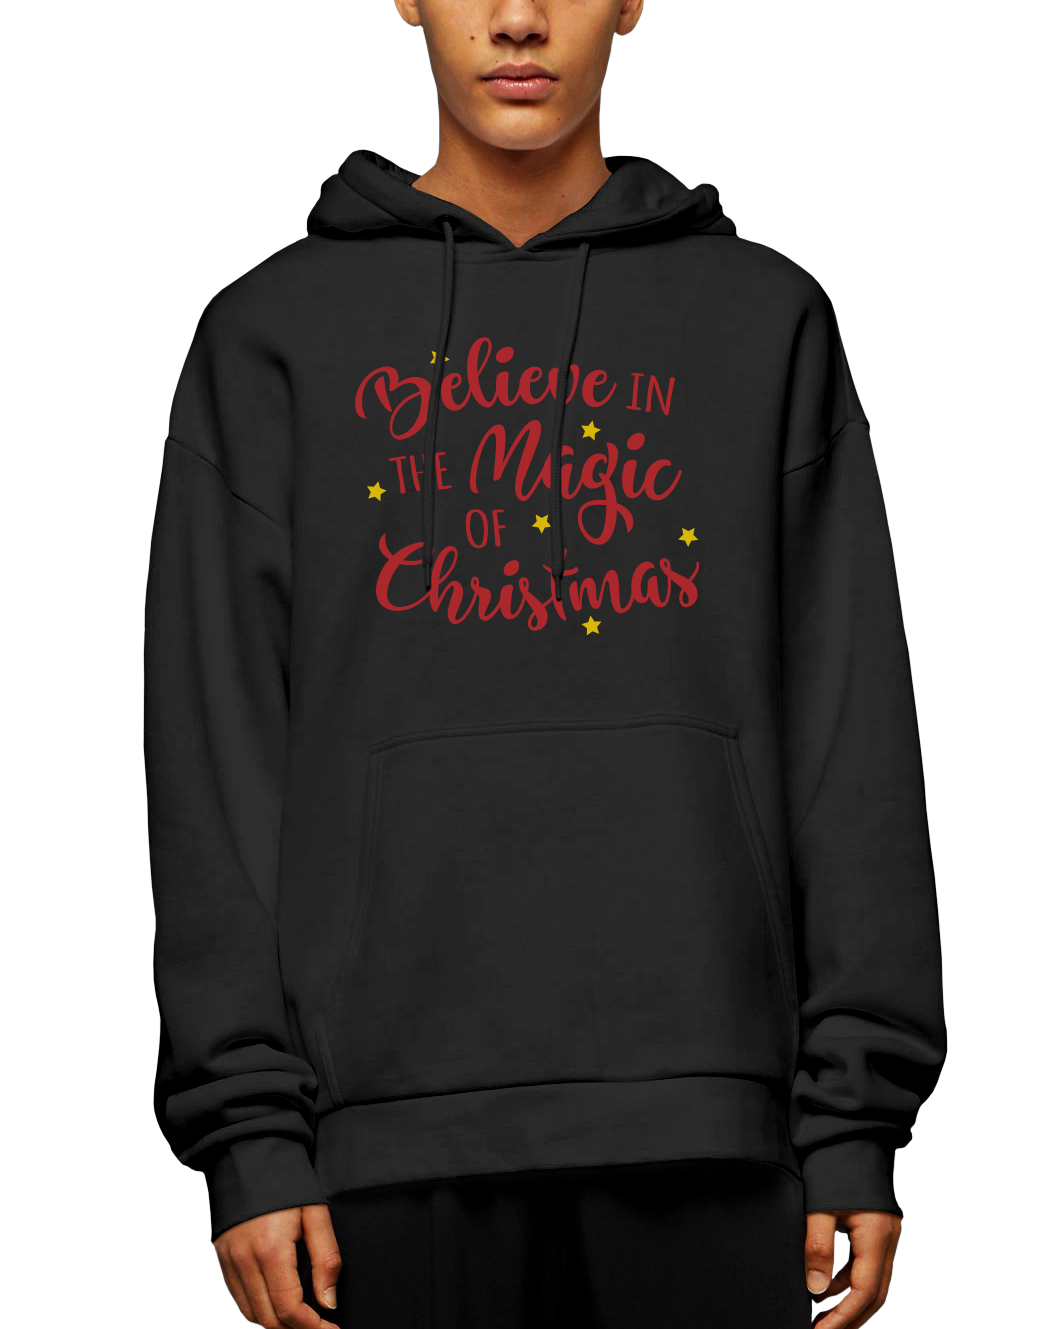 Believe In The Magic Of Christmas Adult Pullover Hoodie